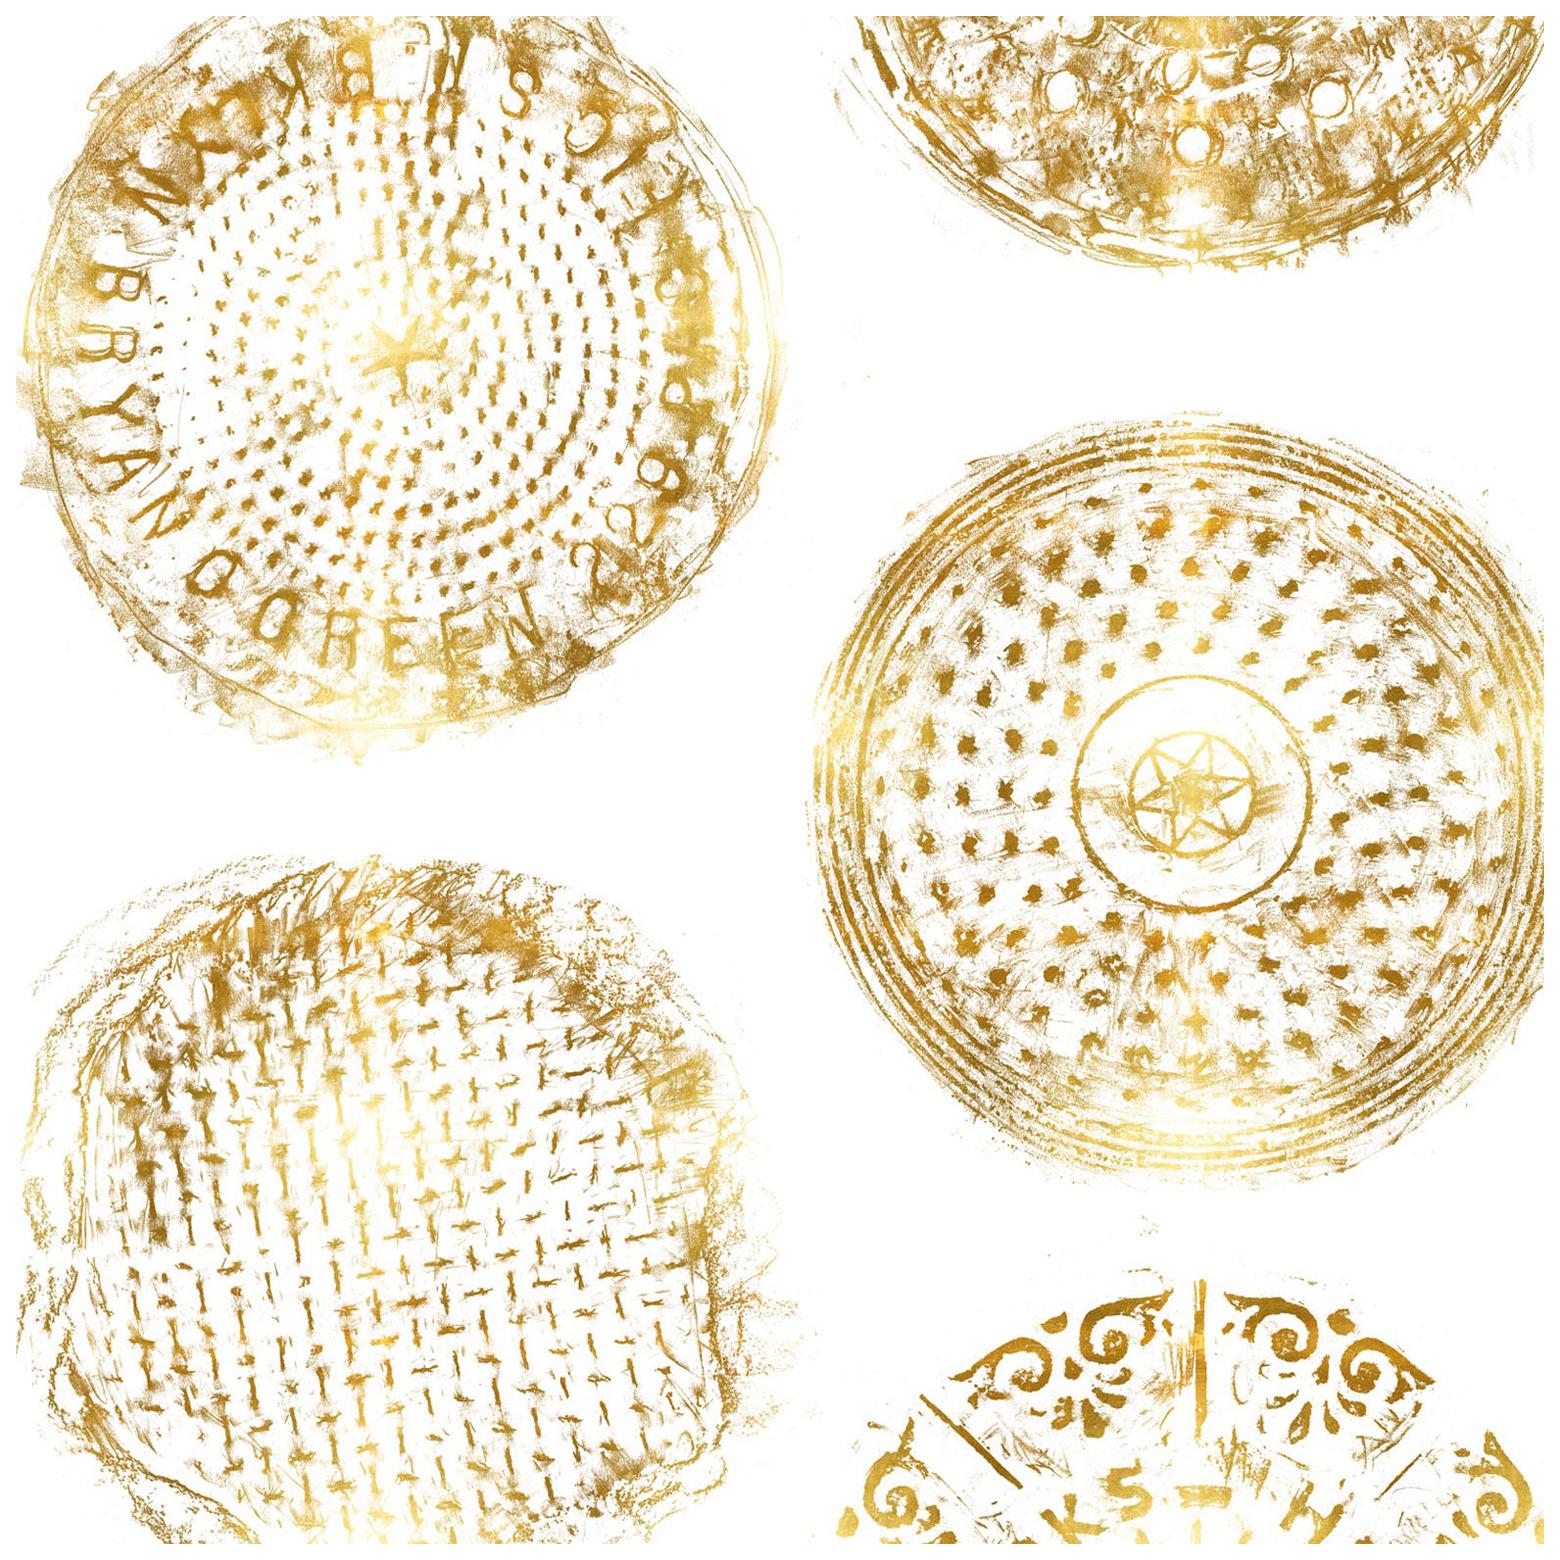 Brooklyn Manhole Printed Wallpaper, White with Gold Manhole Cover For Sale